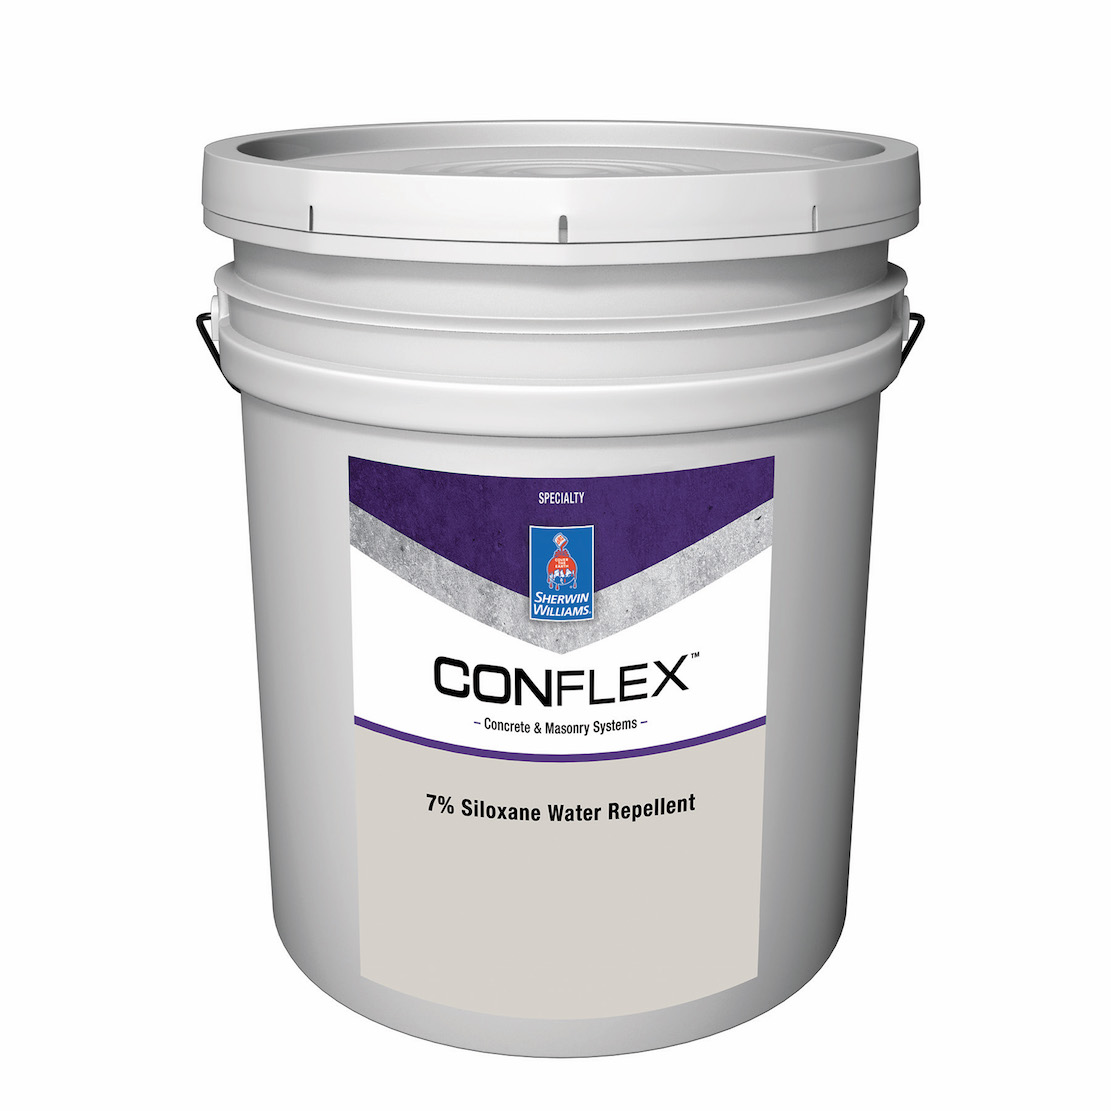 Sherwin-Williams recently updated its line of concrete and masonry coatings, including 19 ConFlex solutions color-coded for easier reference. The ConFlex Proven Performance Lineup includes ConFlex Block Filler for prep work (labeled in blue); an array of nine, green-labeled finishing products, including acrylic coating, waterproofer, elastomeric coating, and solvent-borne smooth coating; and purple-labeled 7 percent Siloxane Water Repellent (shown). 